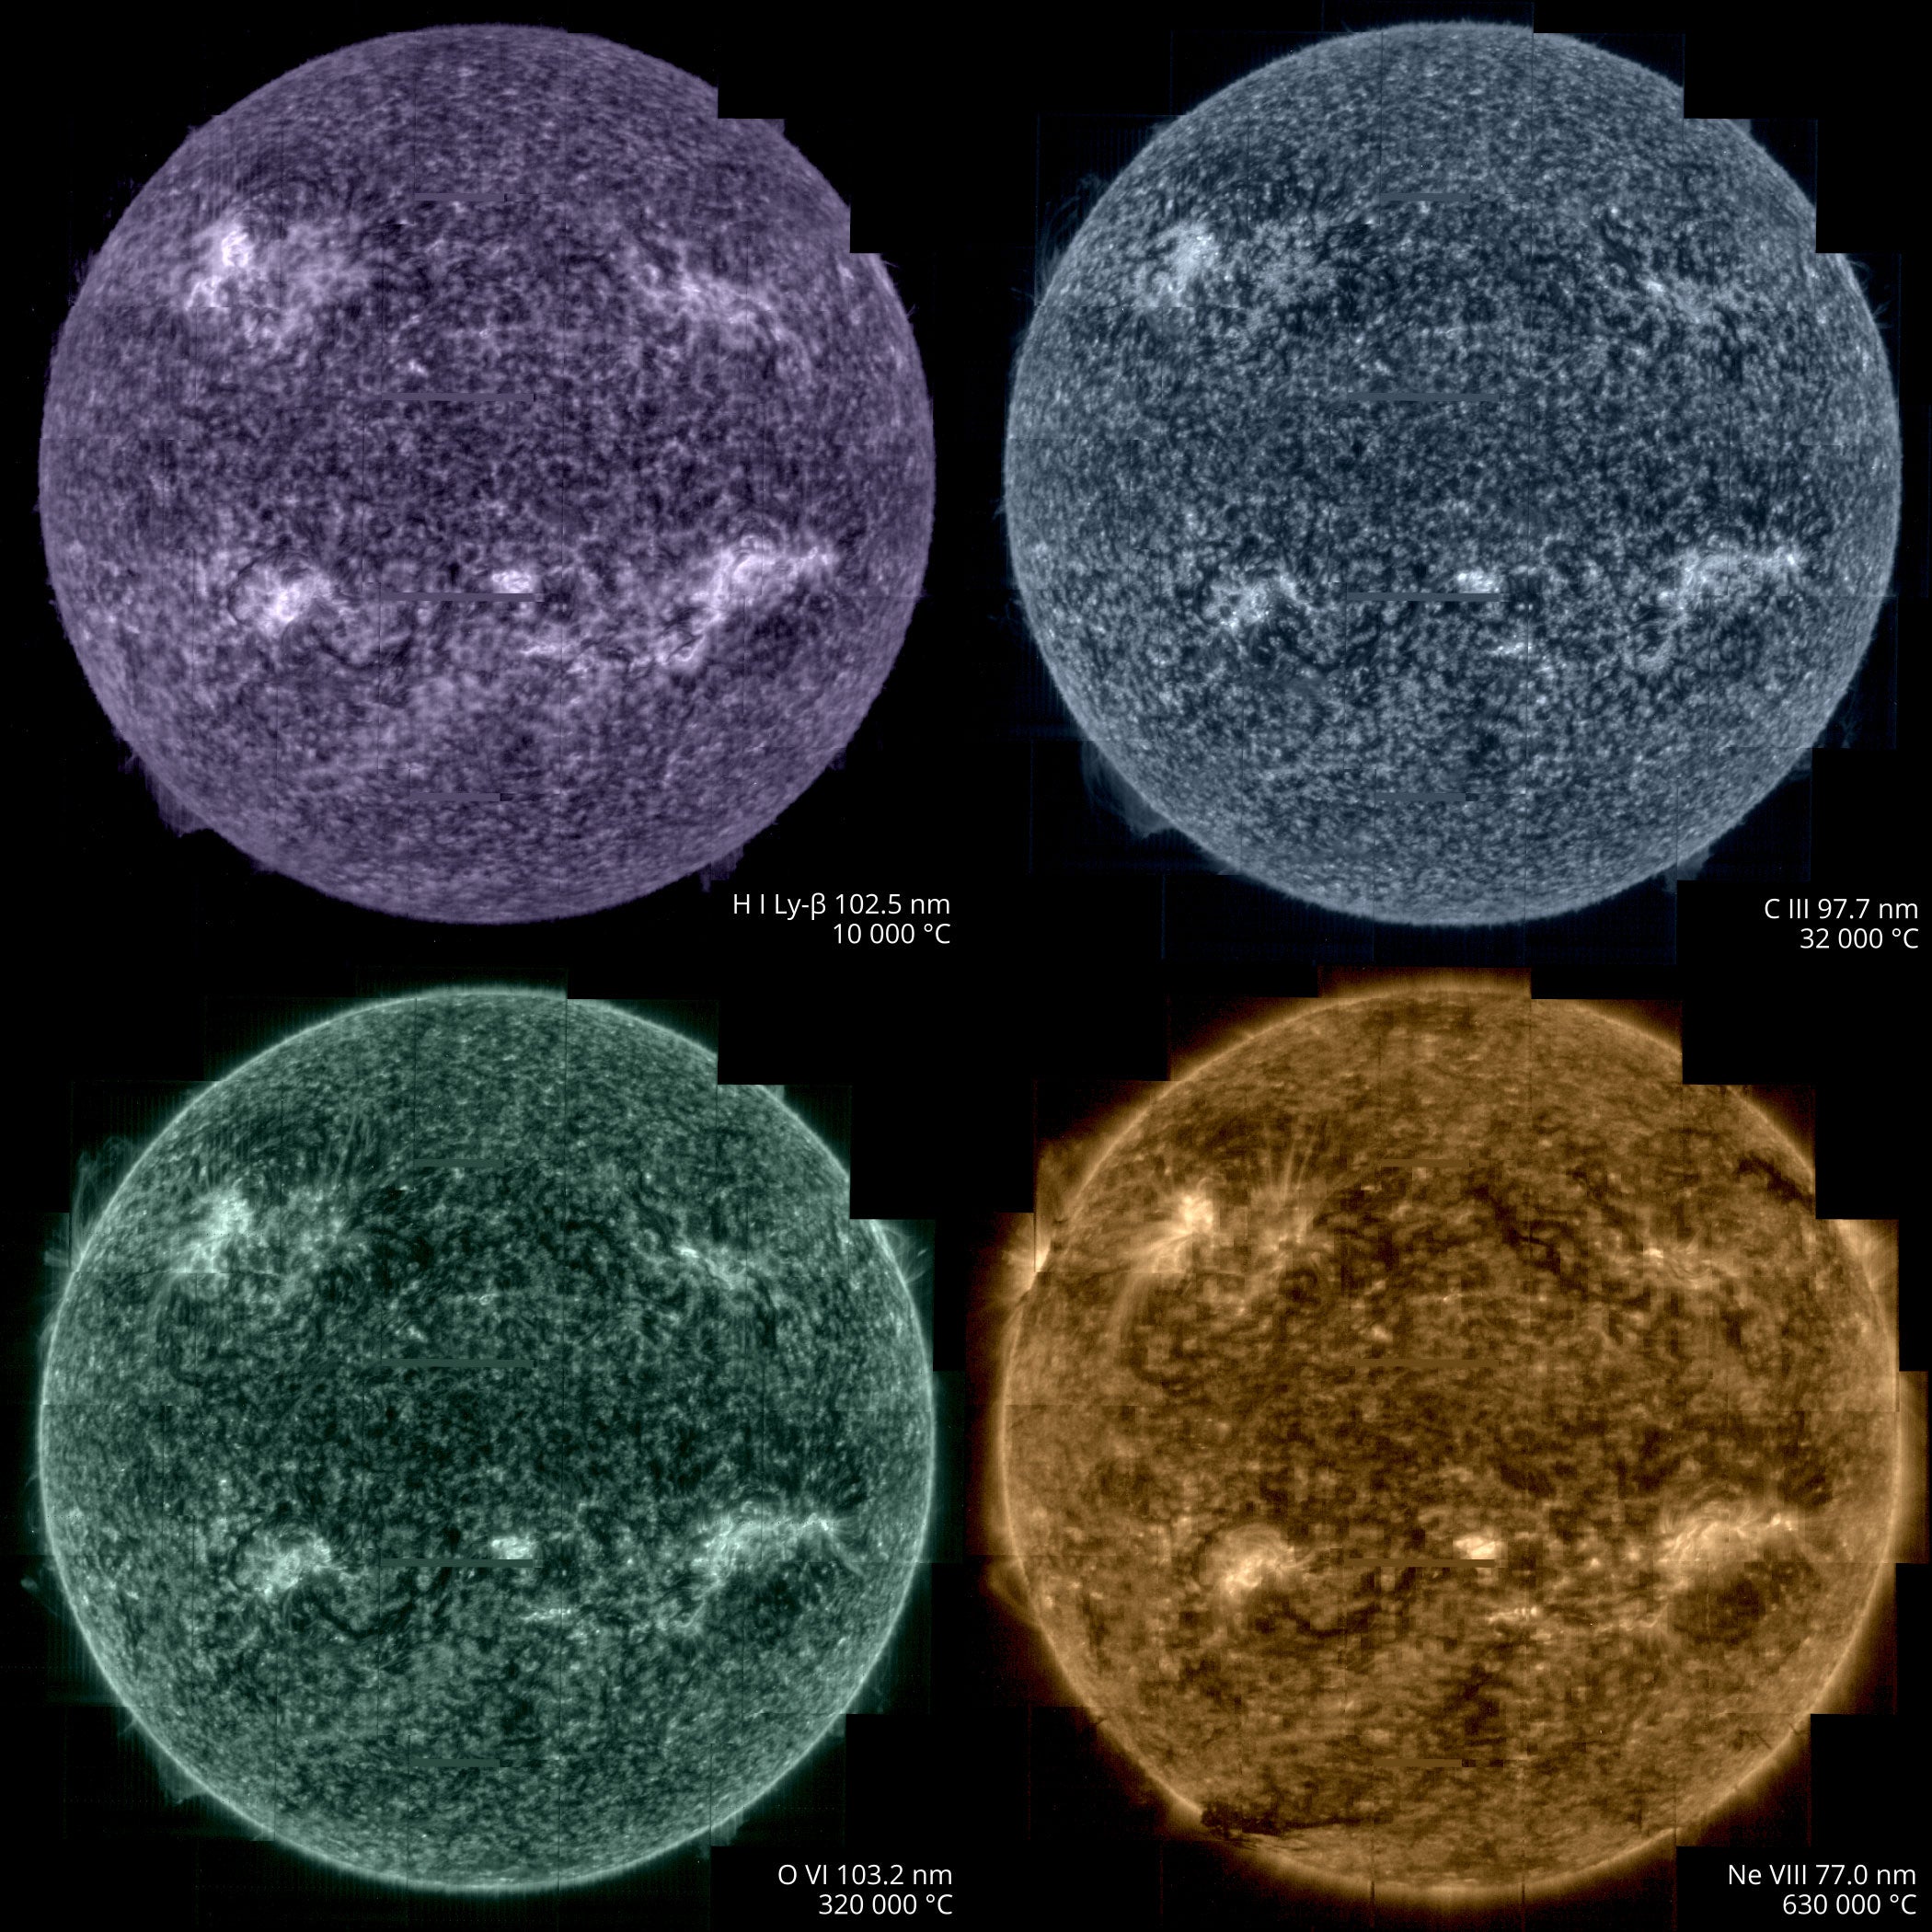 four images of the sun corresponding to different temperatures by the European Space Agency